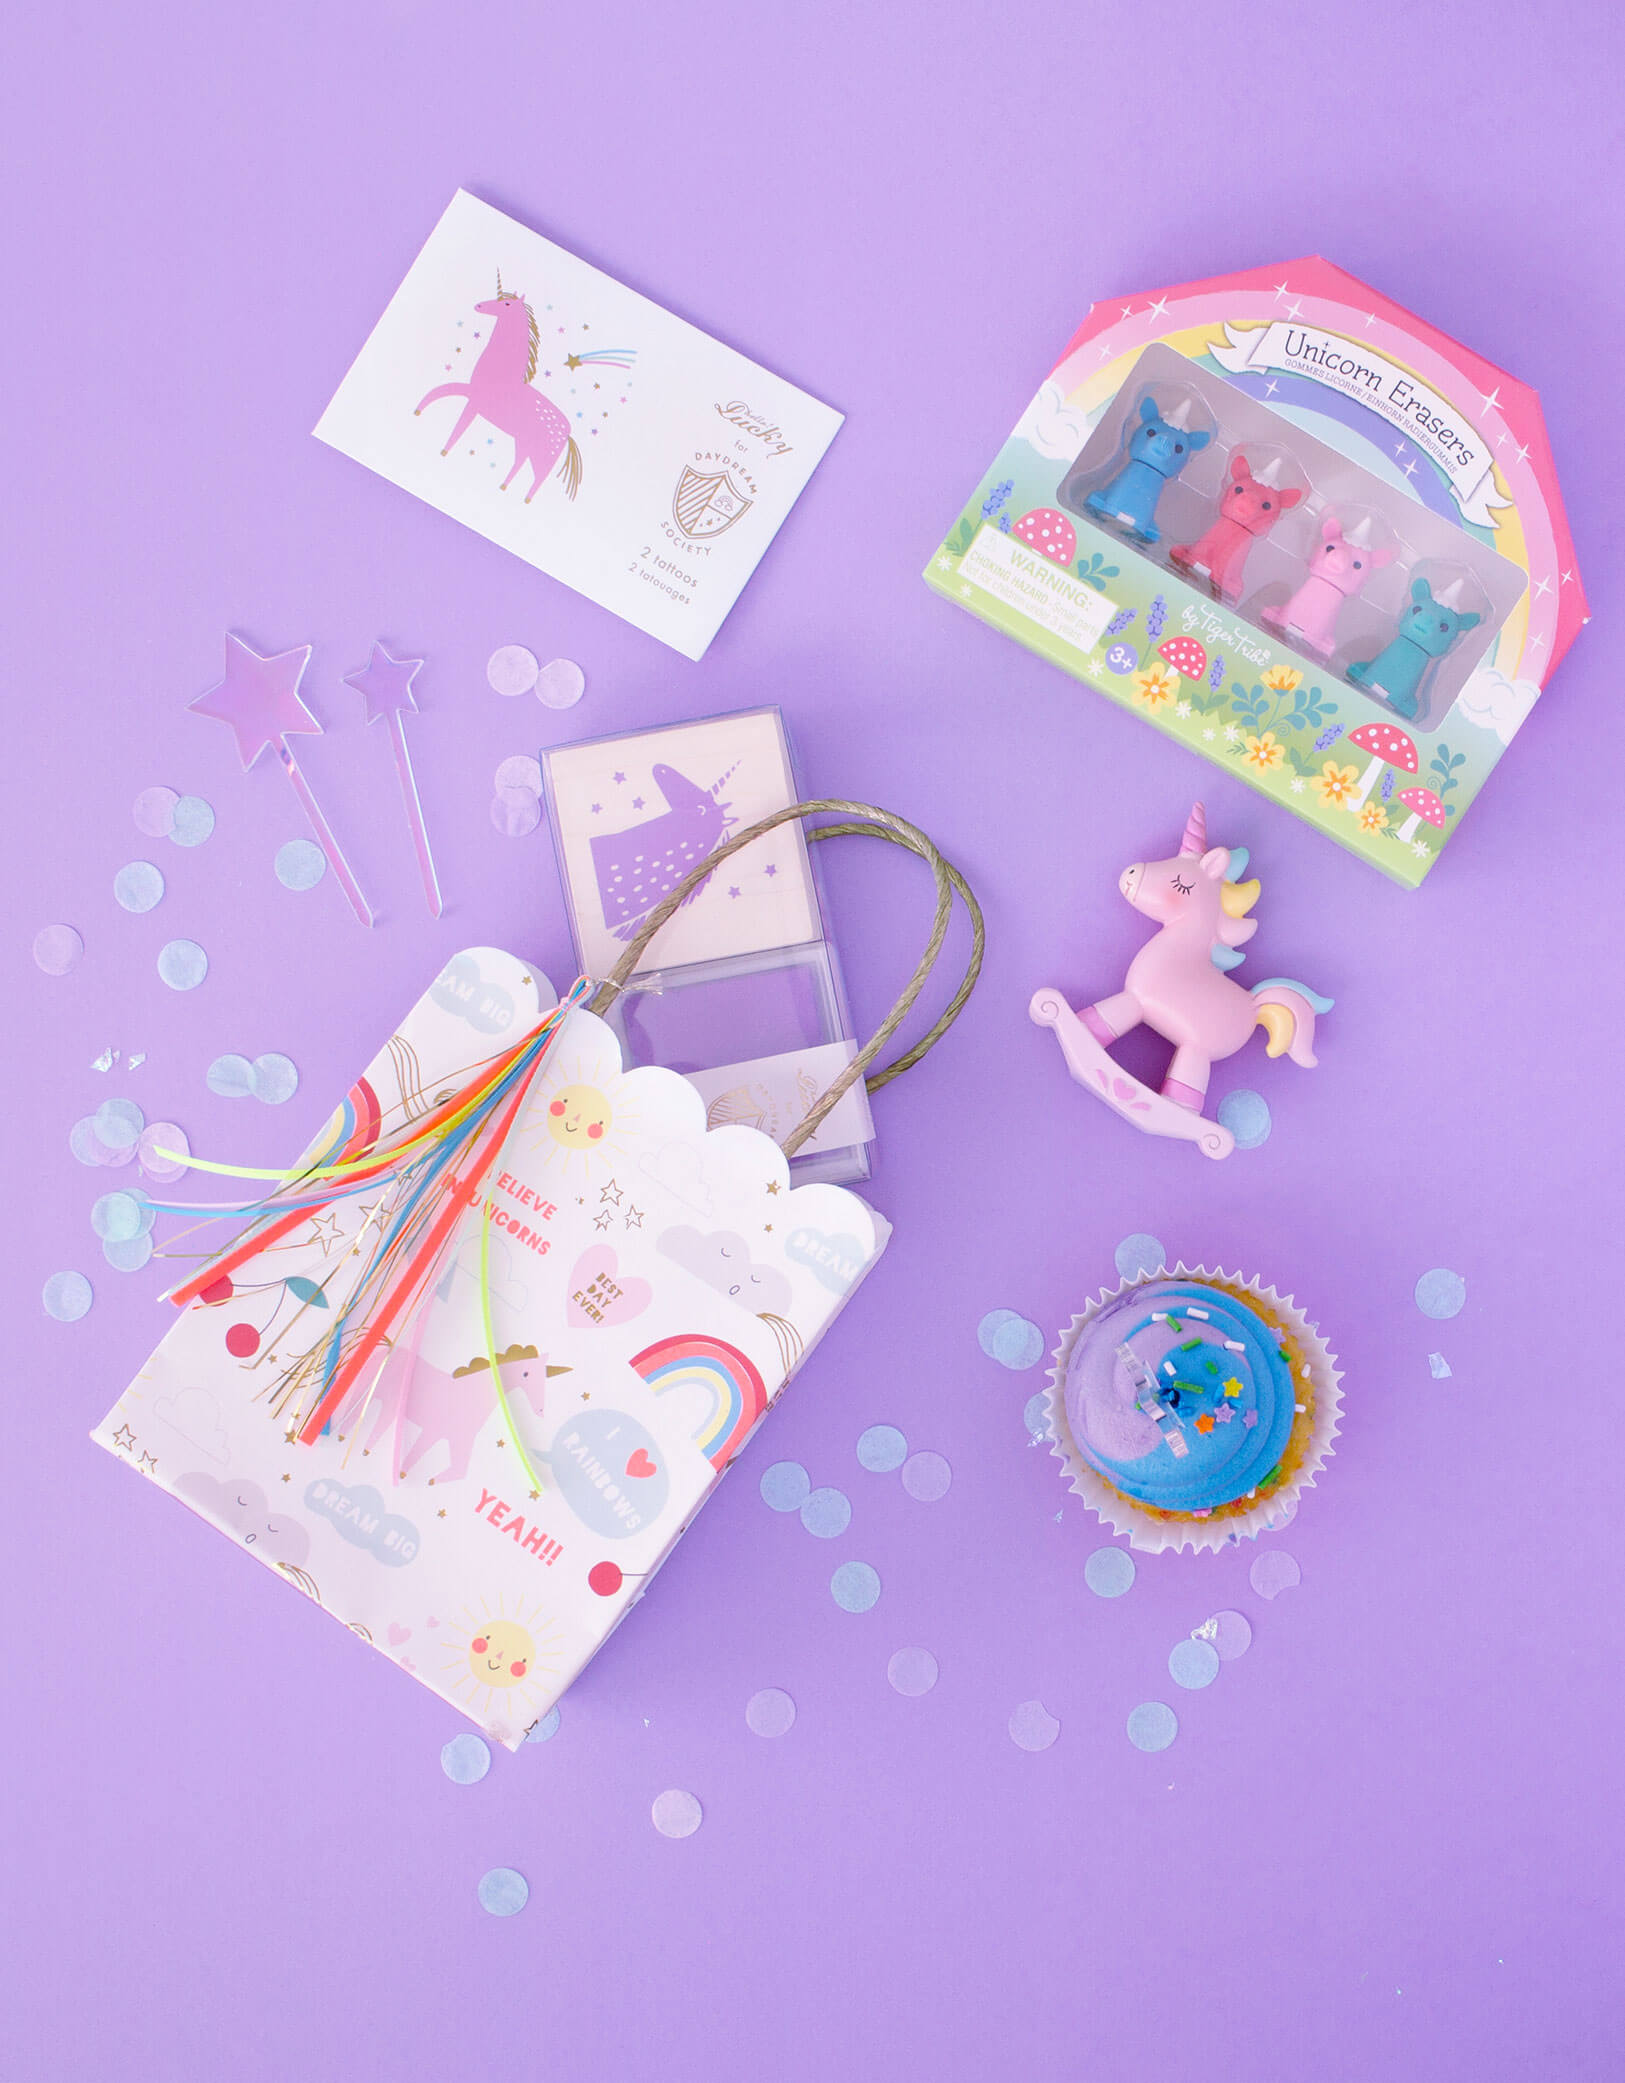 unicorn party bag with unicorn eraser, topper, stamp and tattoos